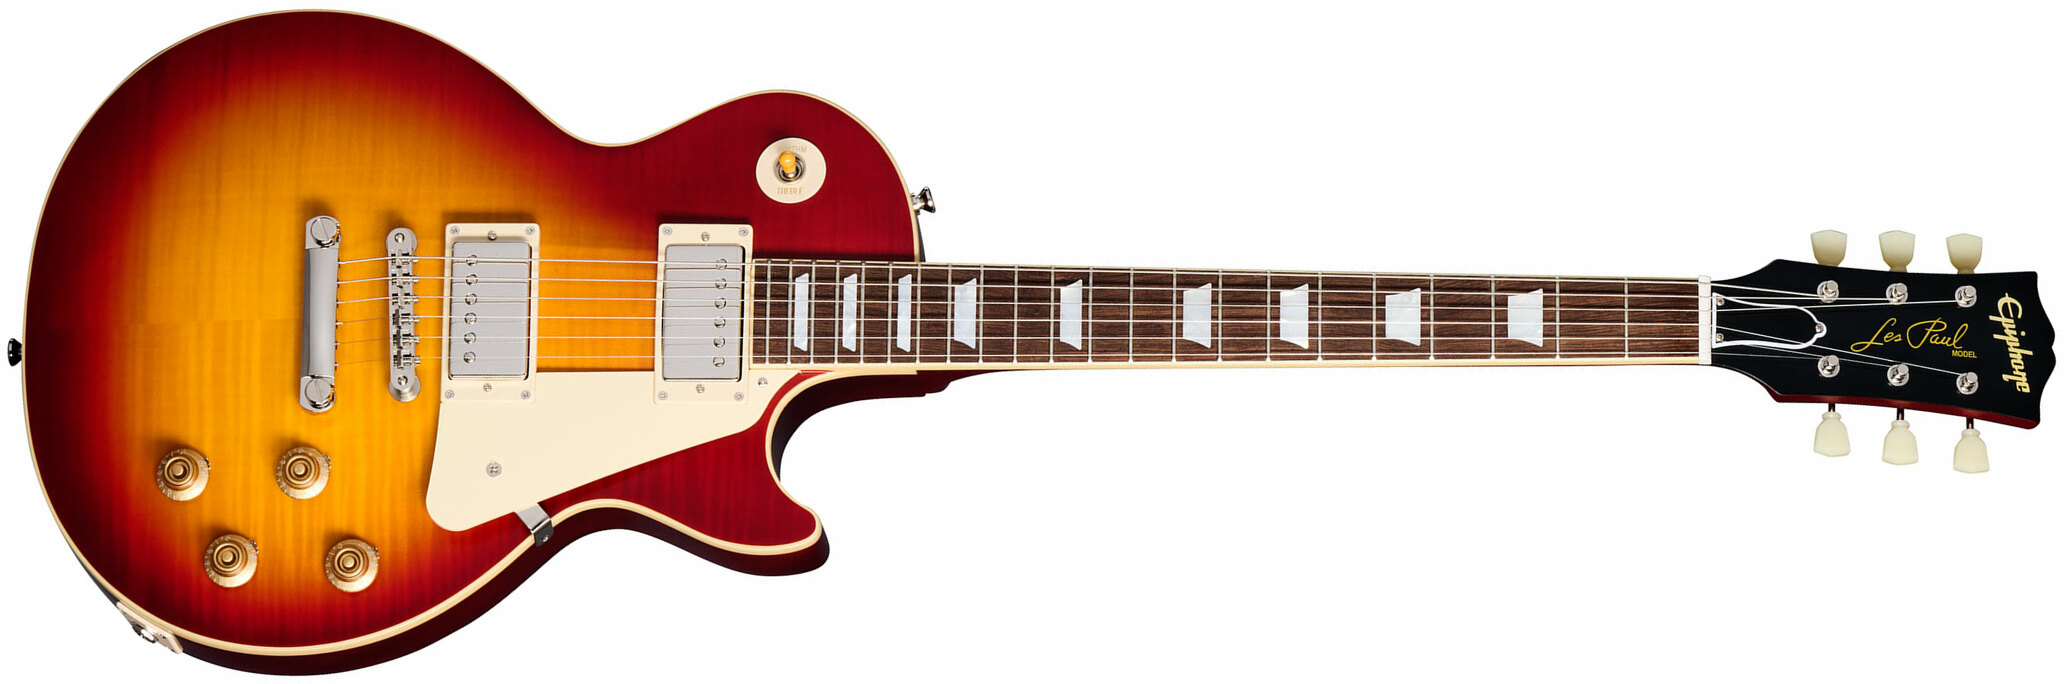 Epiphone 1959 Les Paul Standard Inspired By 2h Gibson Ht Lau - Vos Factory Burst - Single cut electric guitar - Main picture